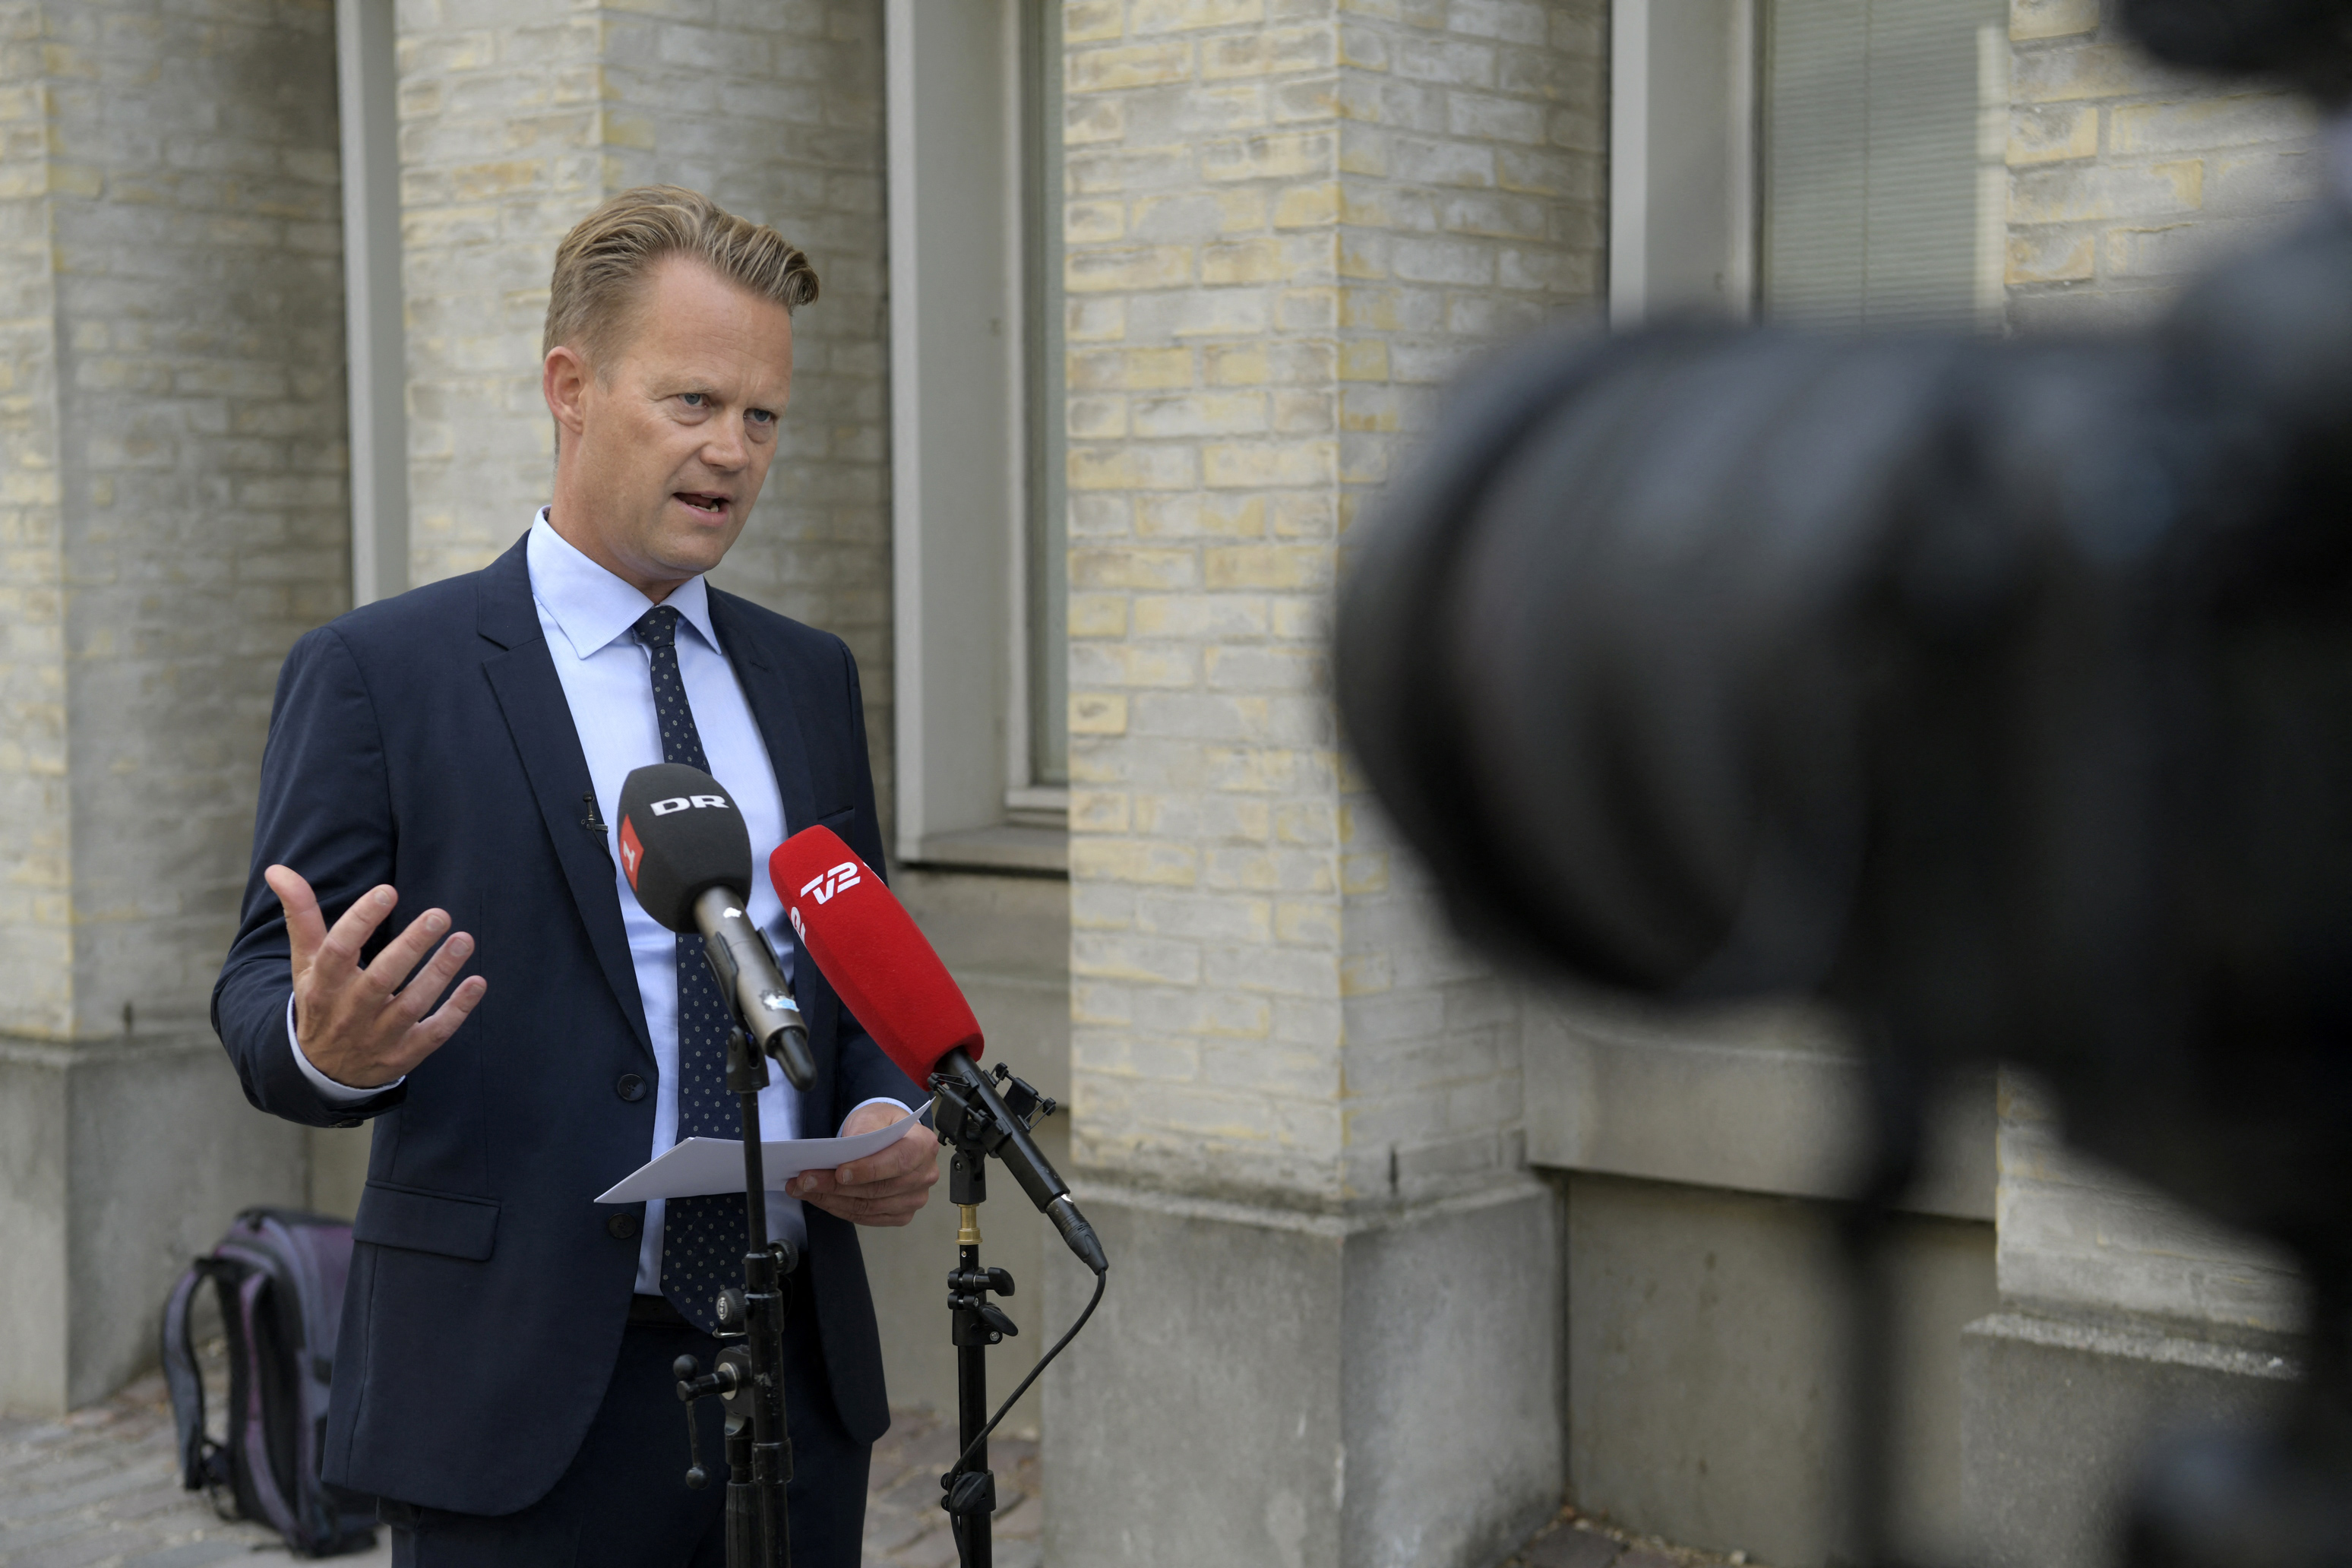 Denmark's Foreign Minister Jeppe Kofod addresses the press in Copenhagen on Friday, August 13, to inform that the Danish embassy in Kabul will evacuate its staff.